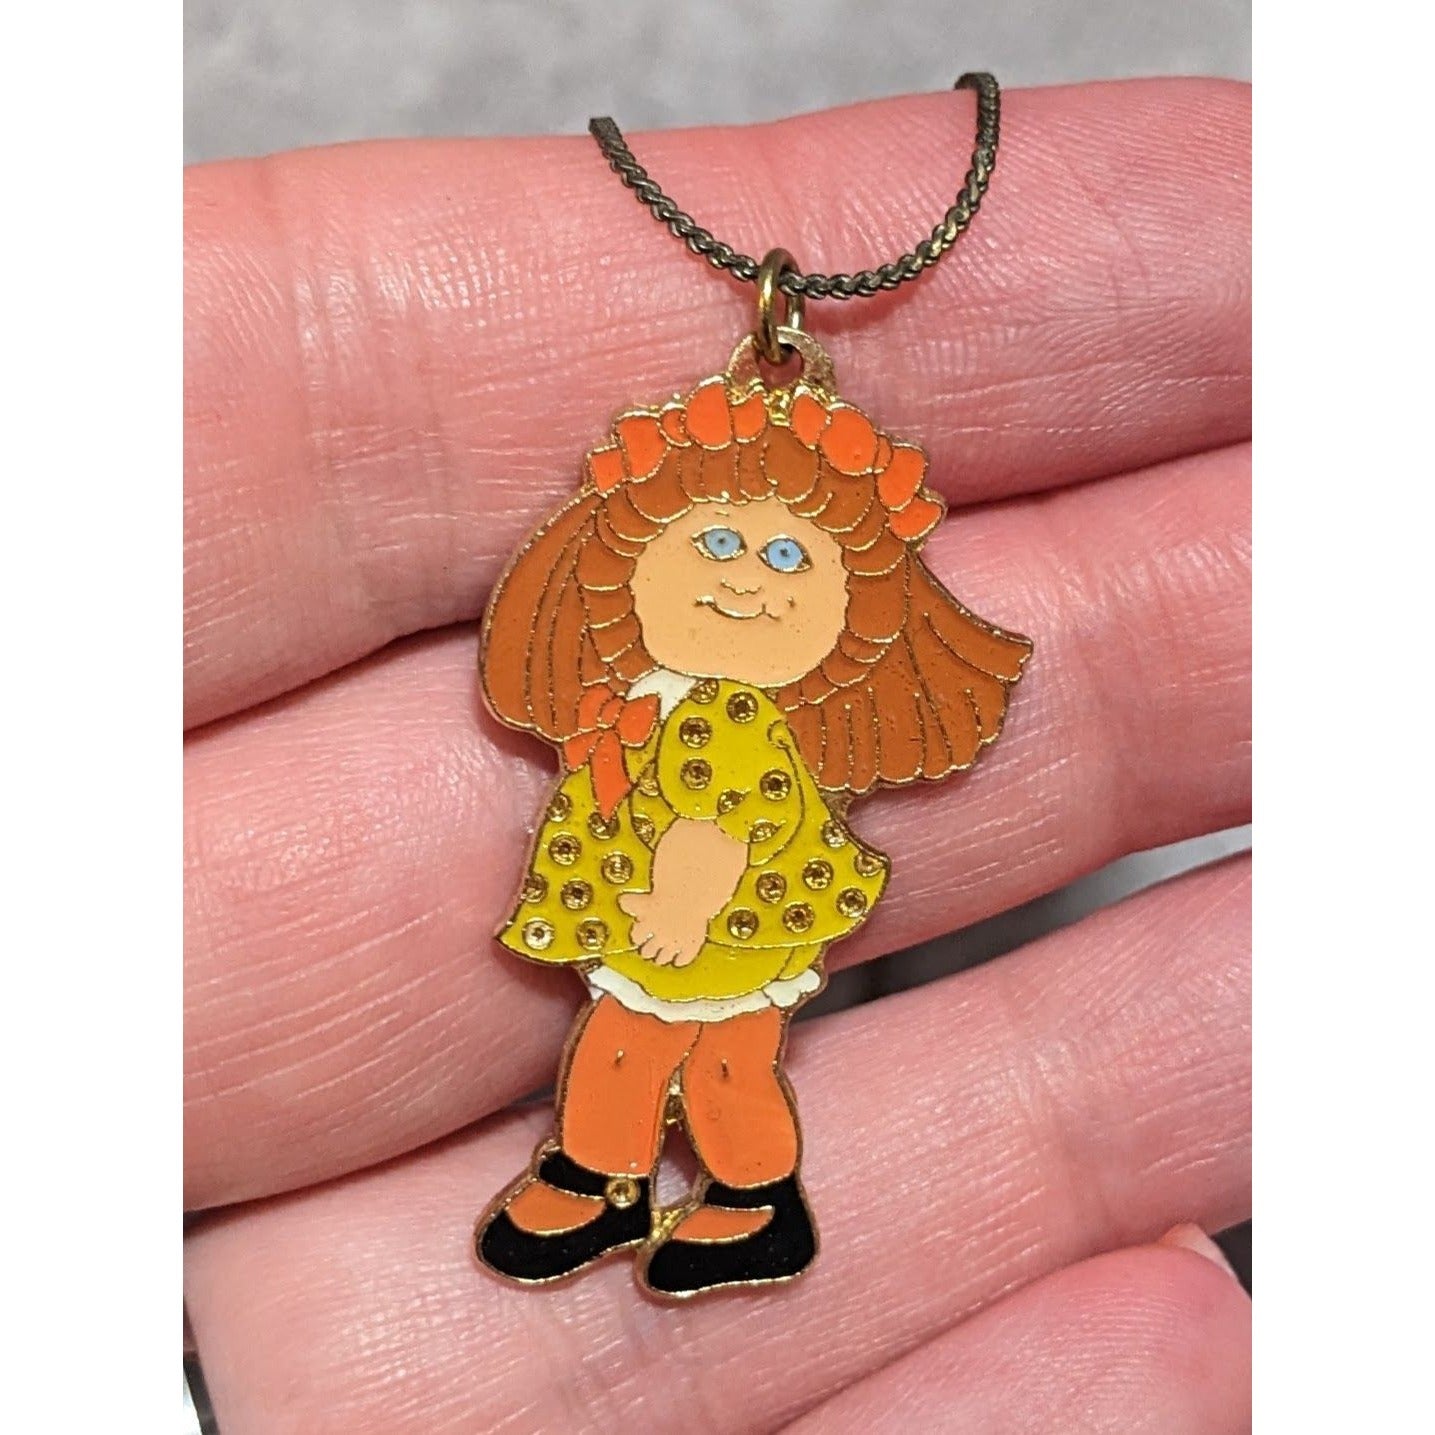 Vintage 80s Cabbage Patch Doll Necklace